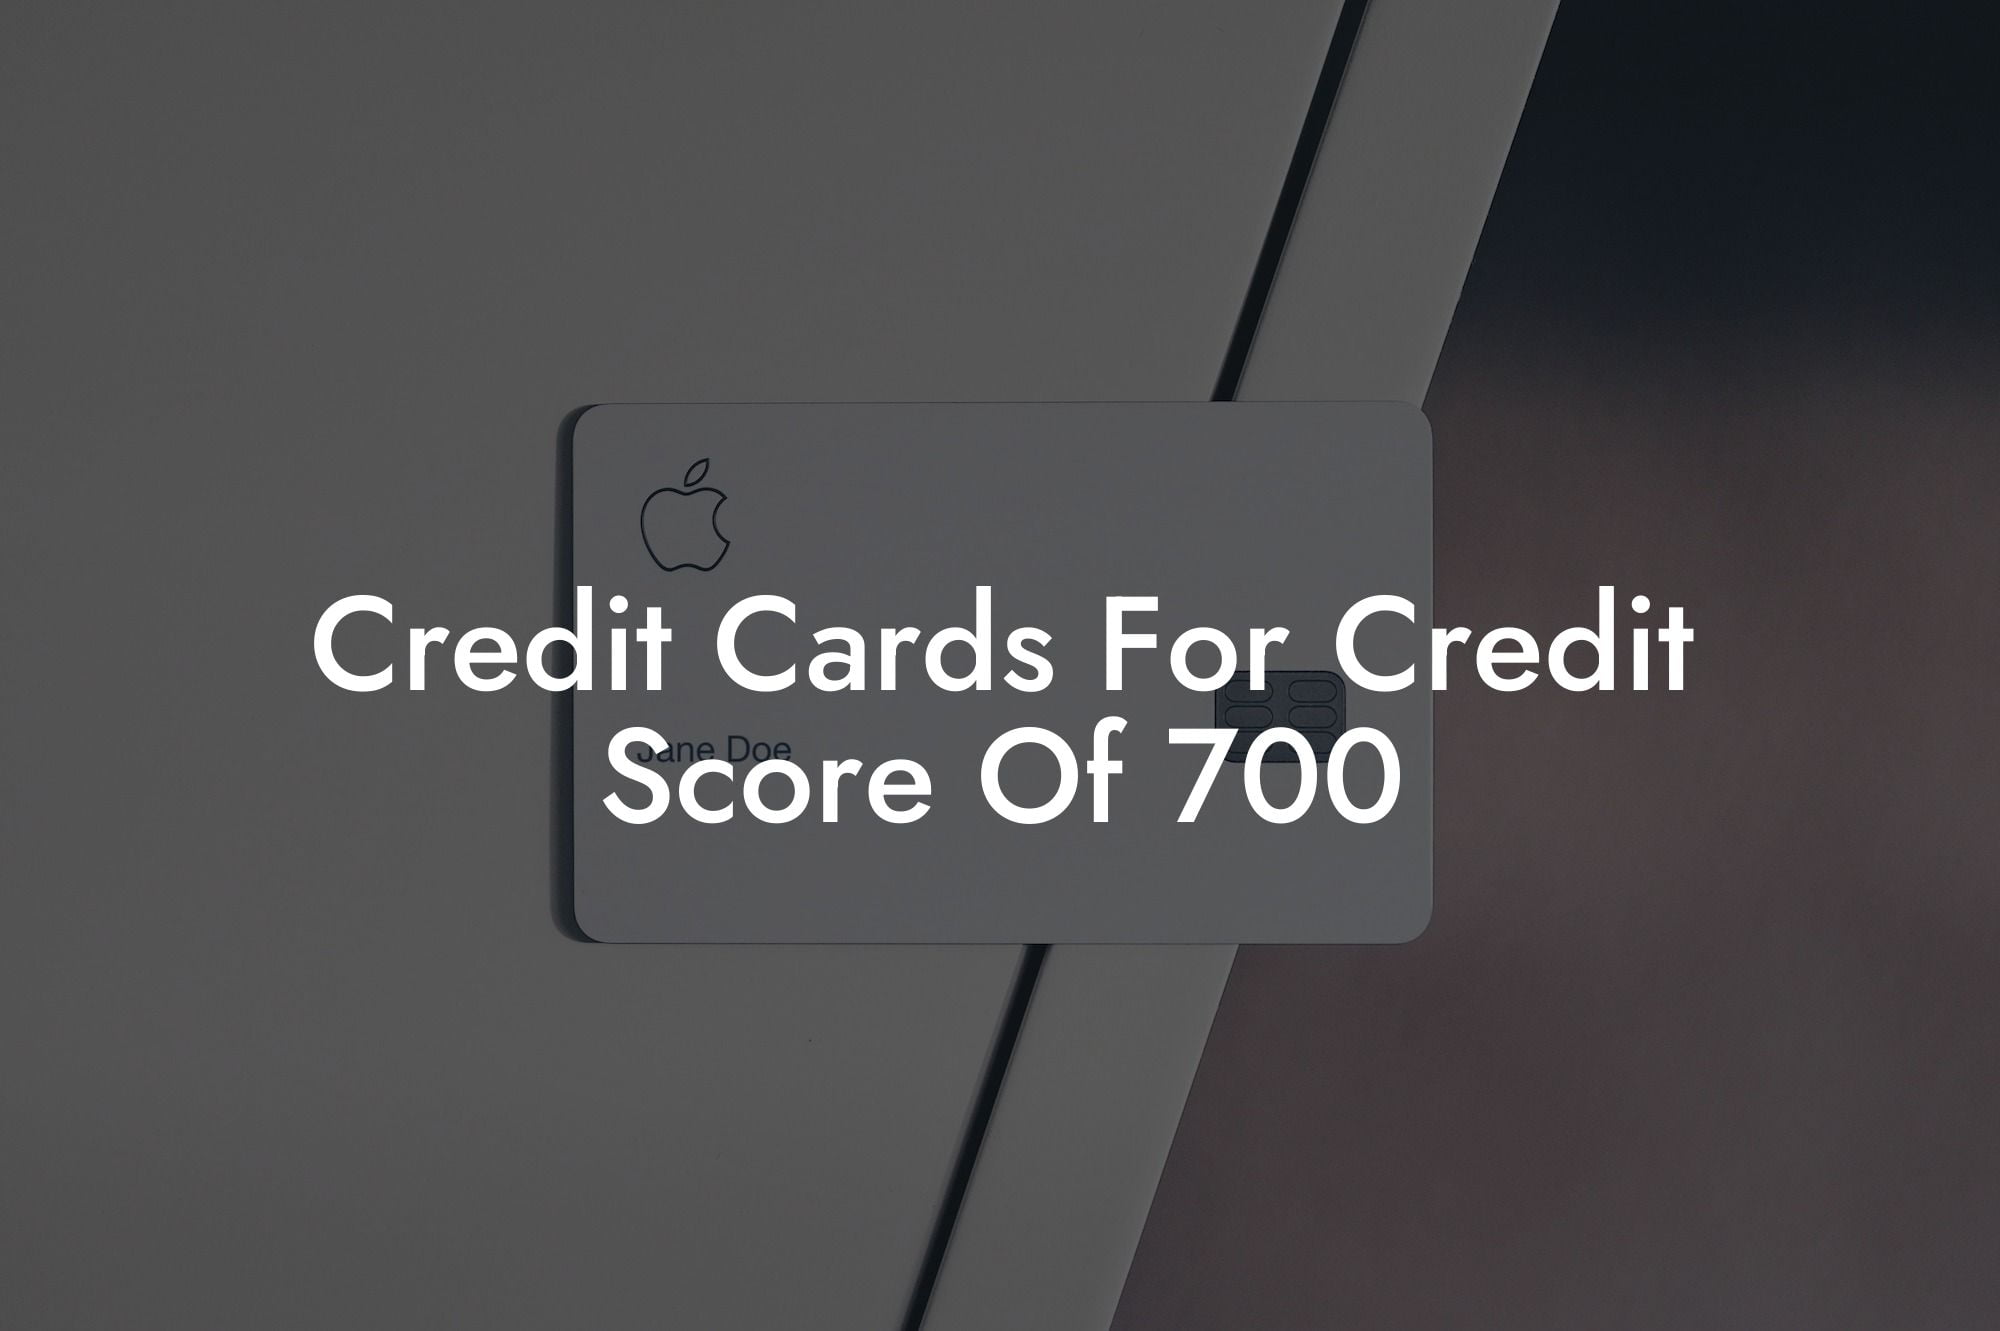 Credit Cards For Credit Score Of 700